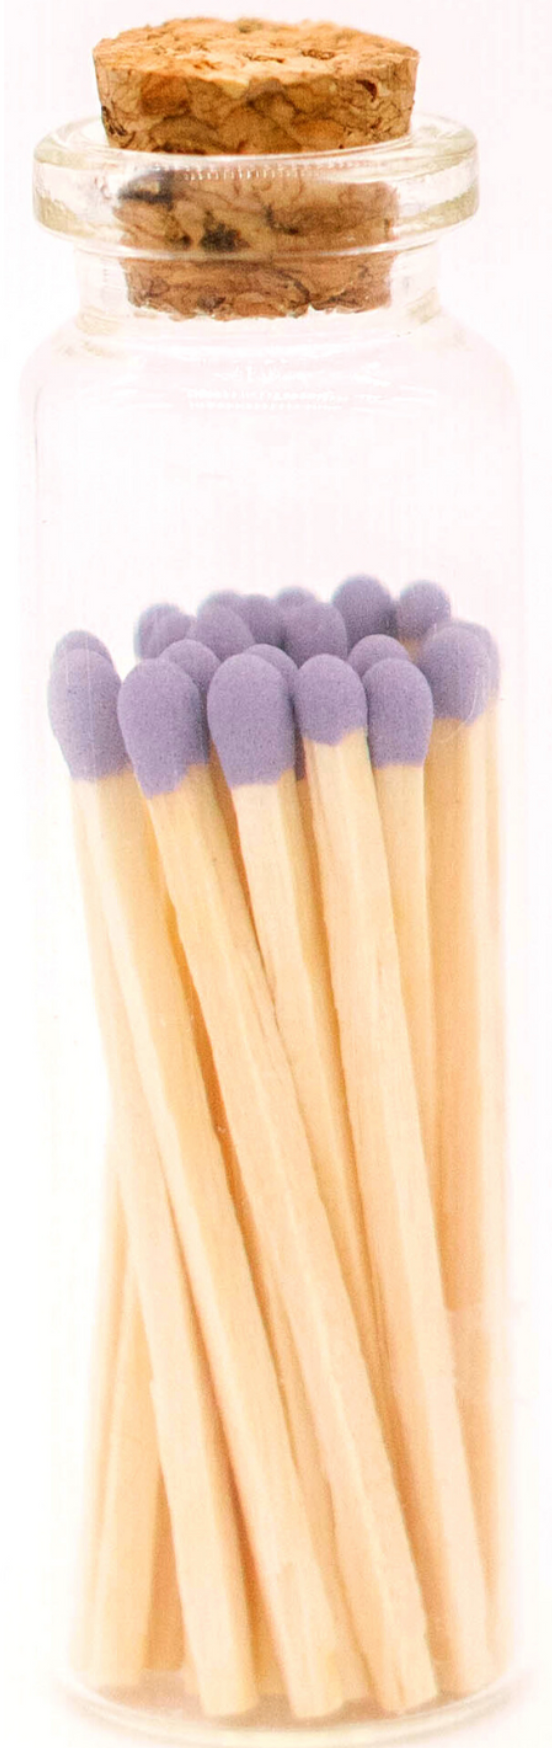 Tip Decorative Matches In Jar with striker available in 5 COLORS